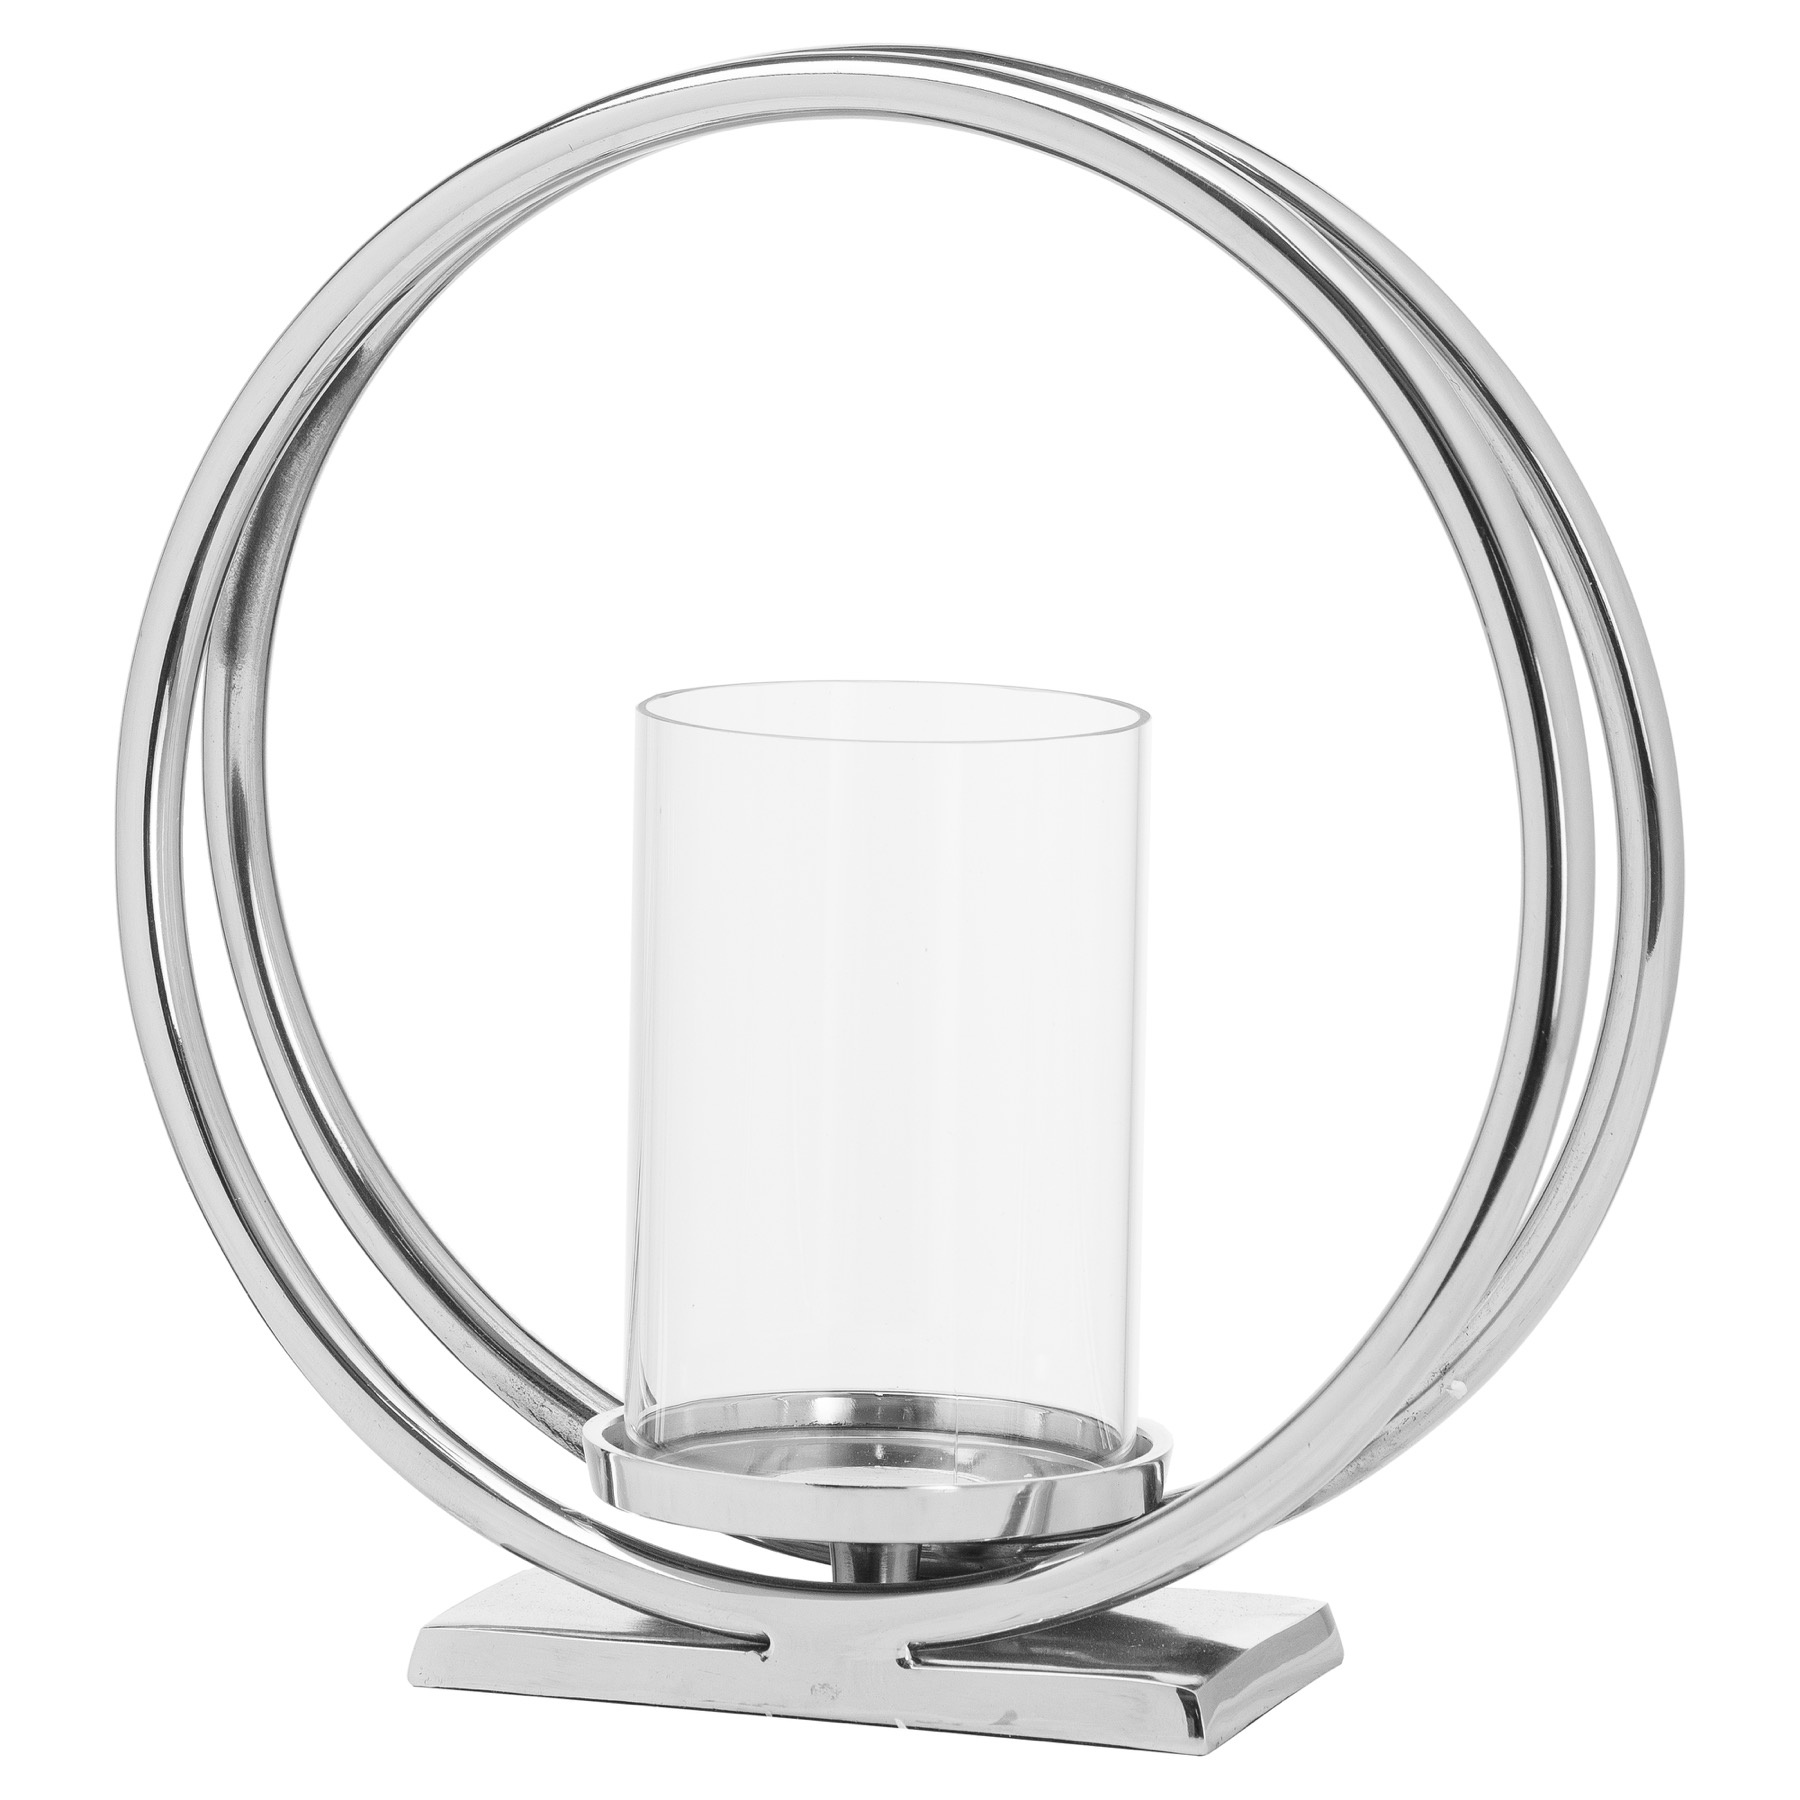 Ohlson Silver Large Twin loop Candle Holder - Image 1